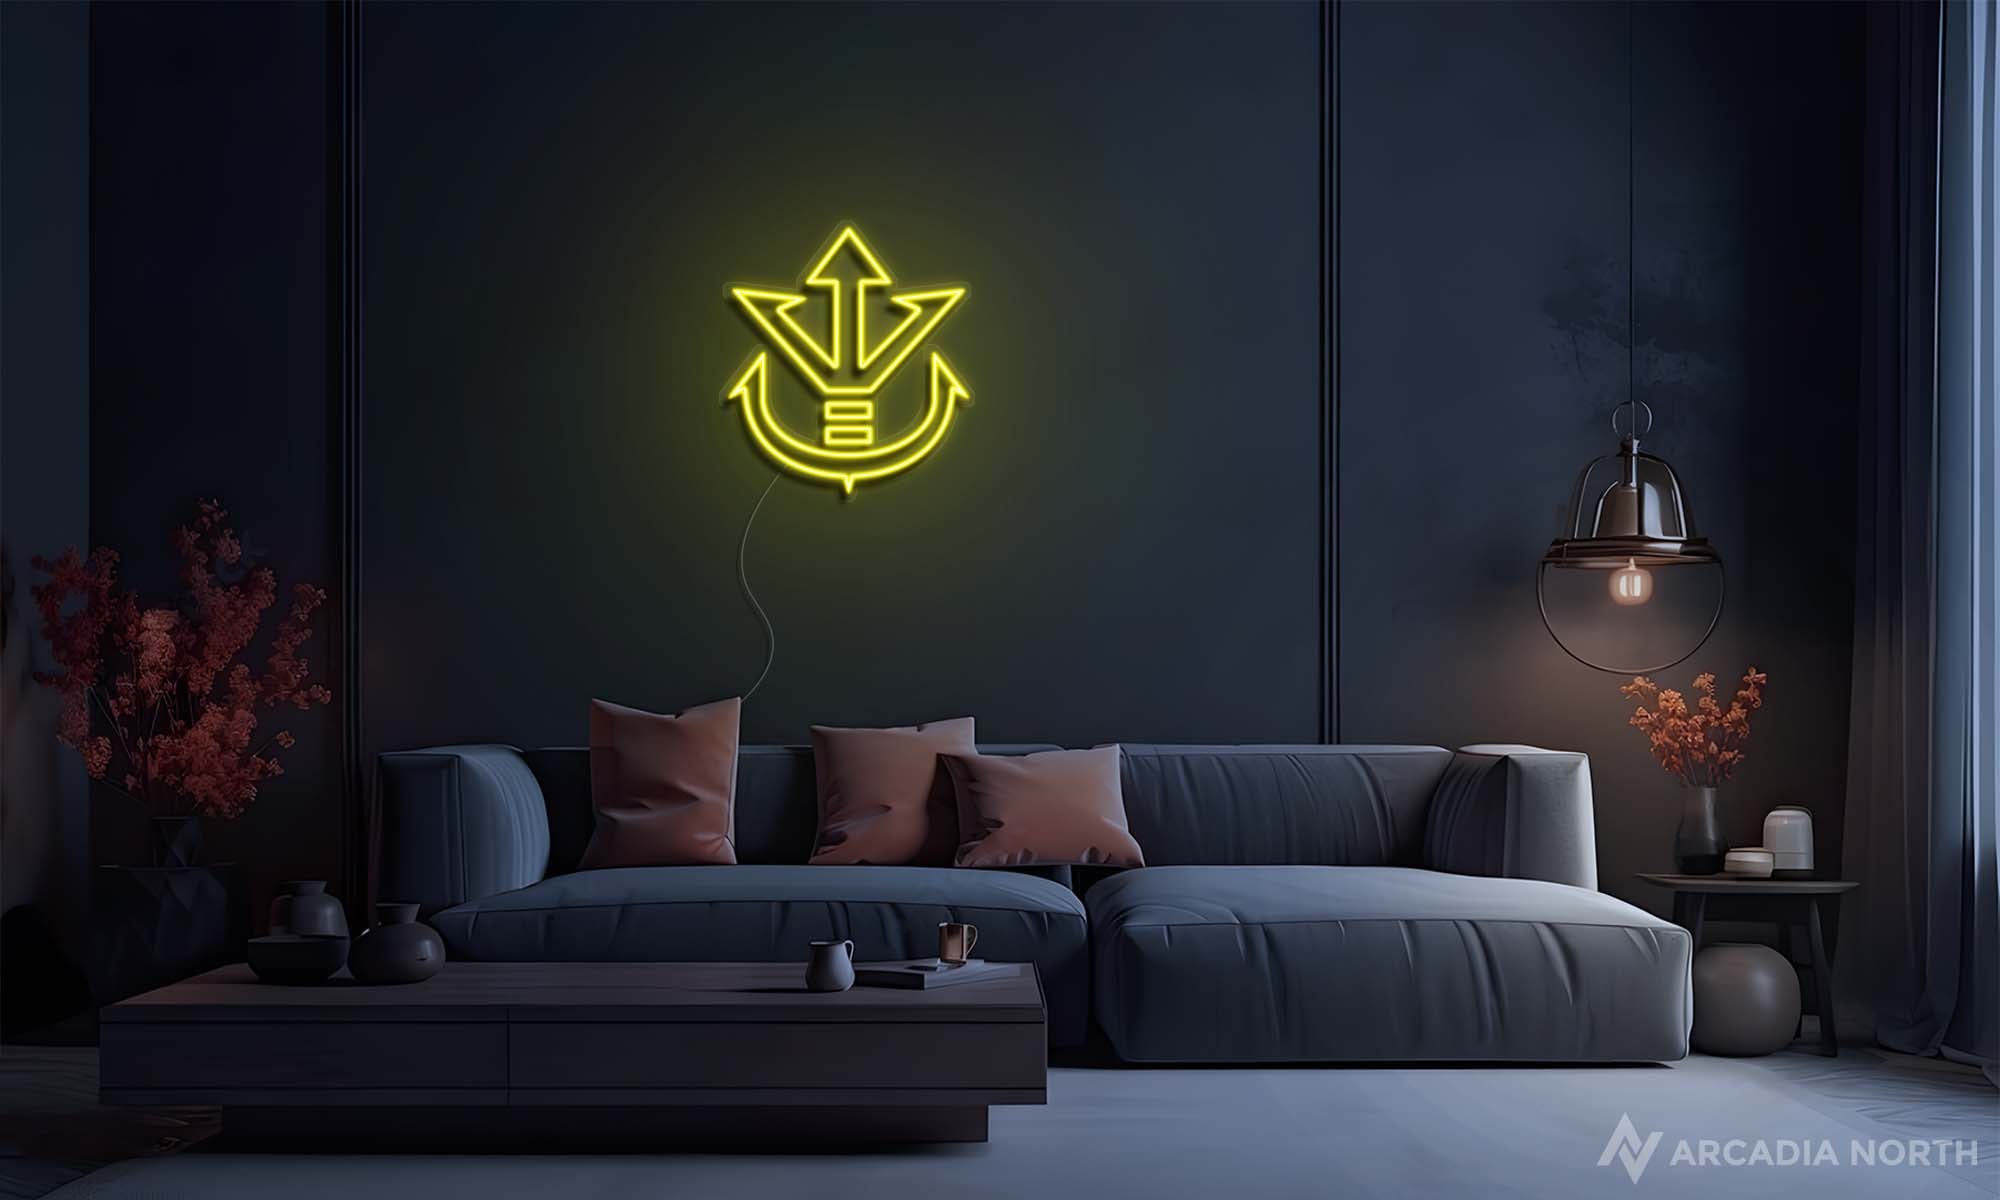 Modern living room with a yellow Dragon Ball anime Saiyan Prince Royal Crest Vegeta neon sign glowing on the wall above a couch